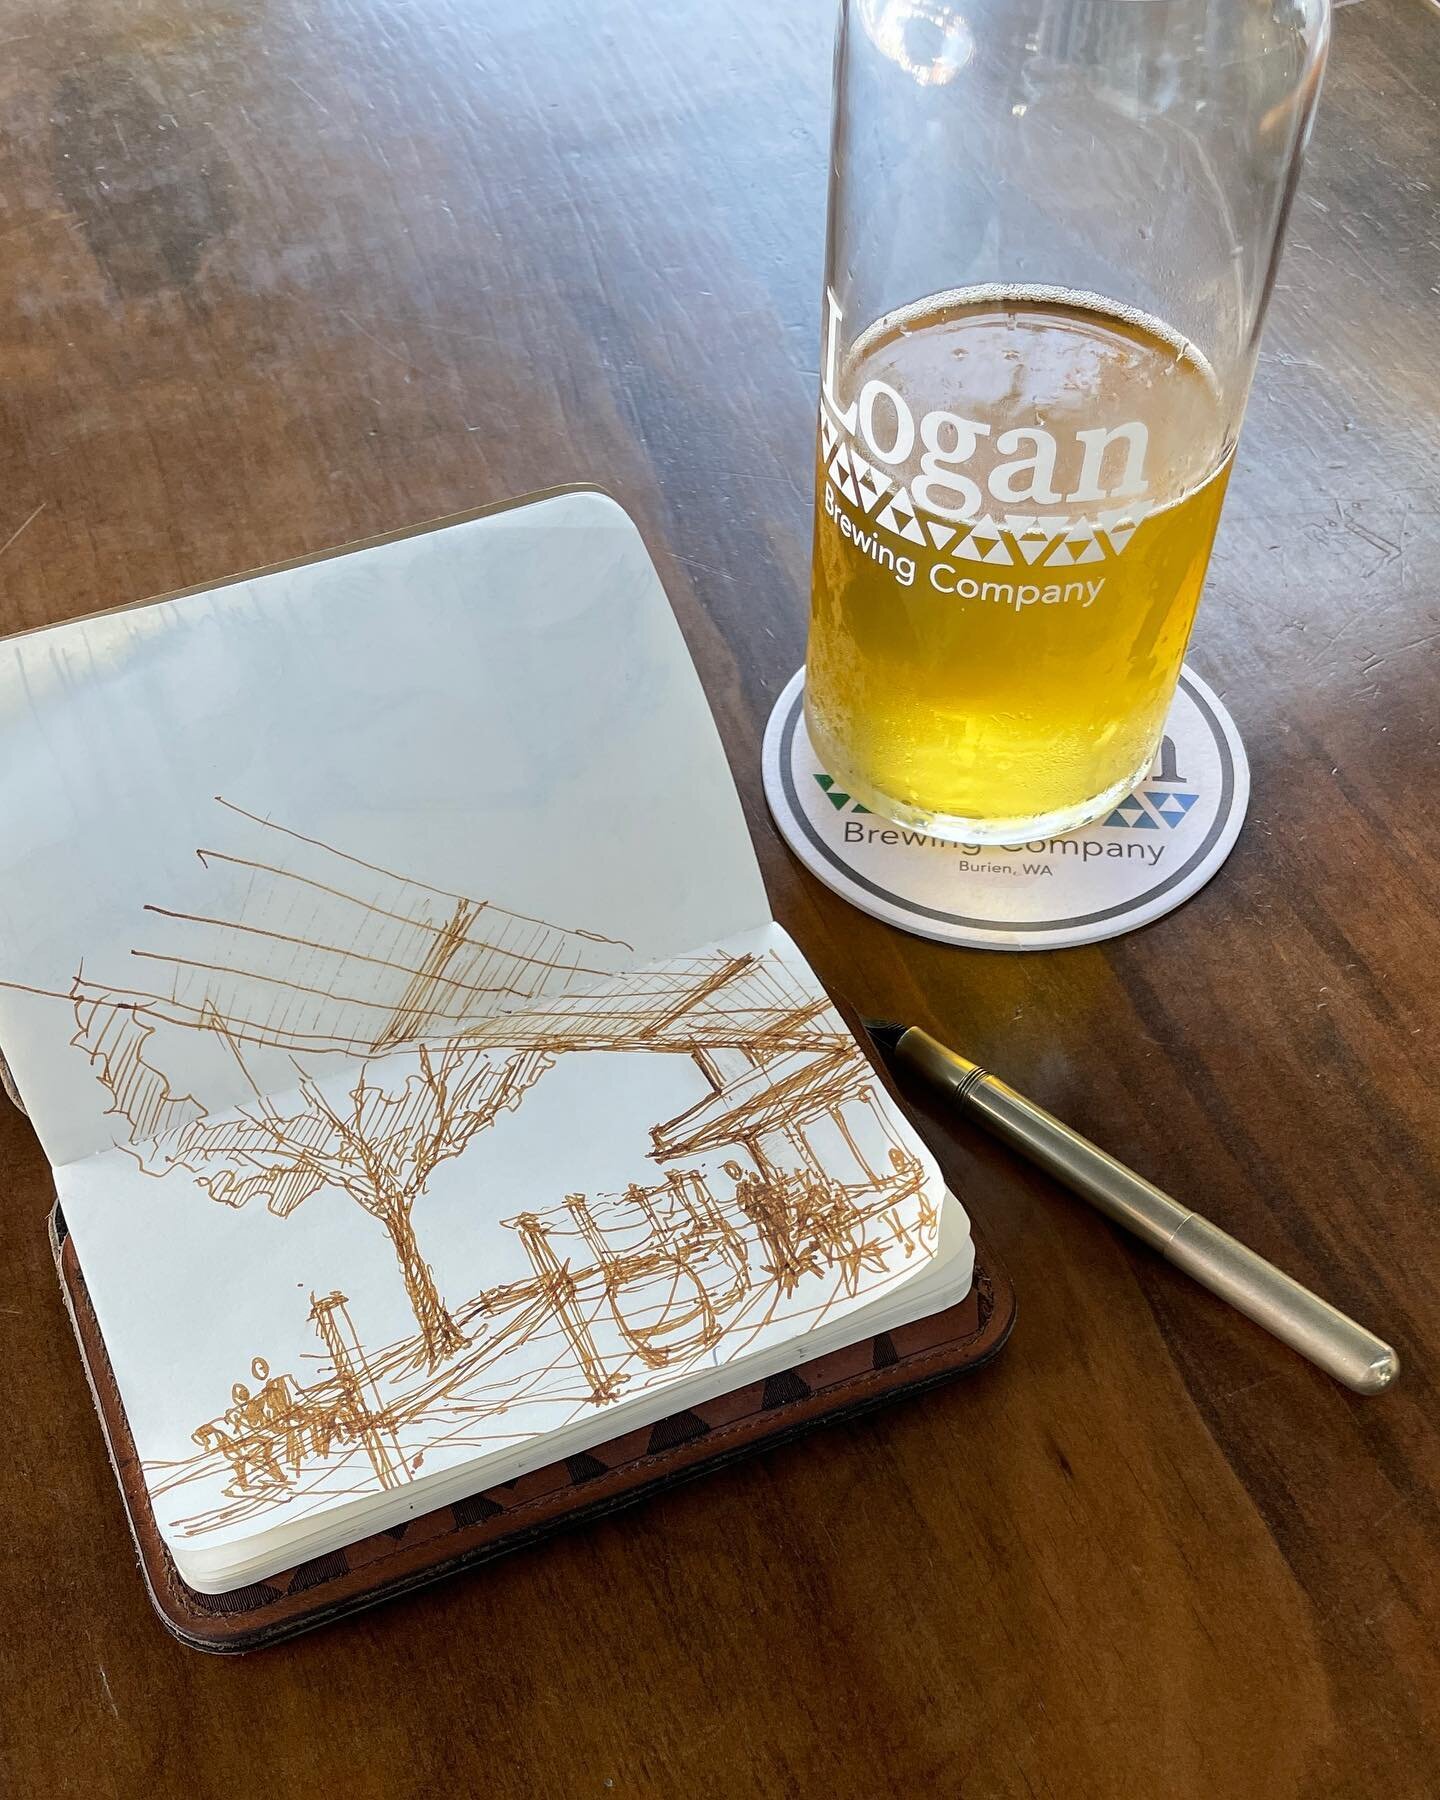 Took a break from my home remodel project to sketch and drink some beer.  Sunny days are gifts up here in the pNW. Don&rsquo;t let them go to waste.